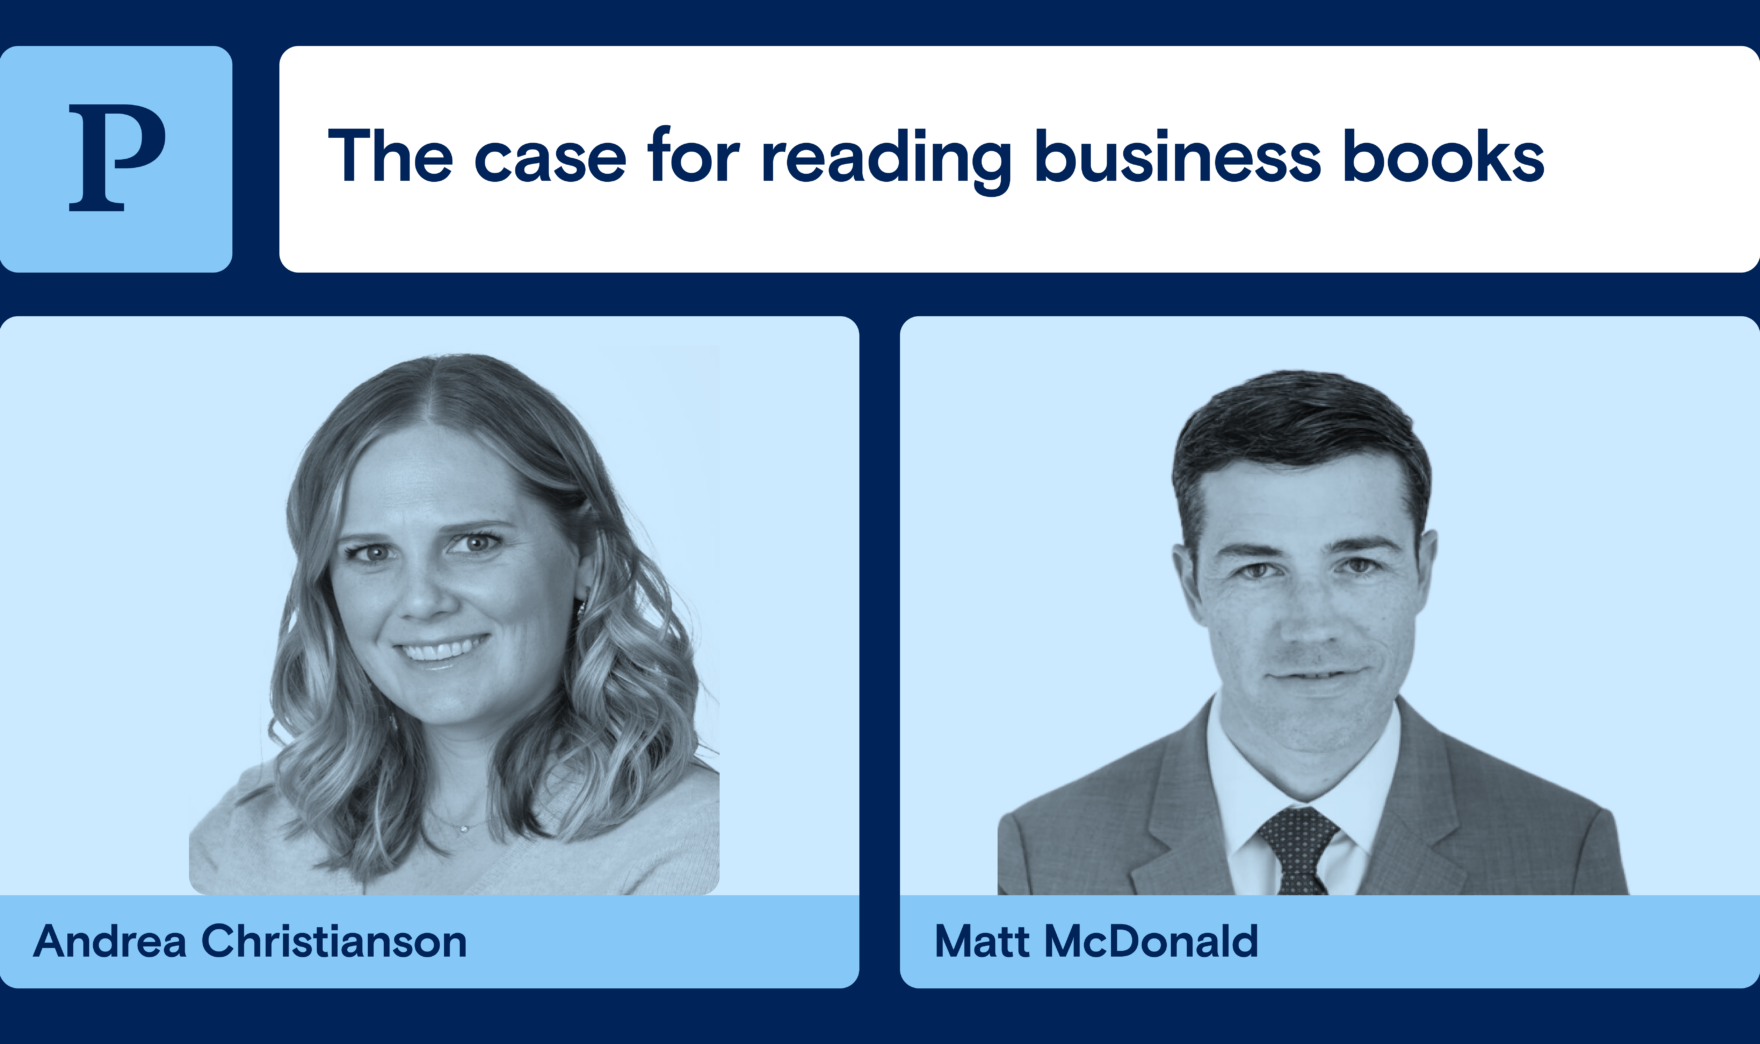 Re-release: The case for reading business books